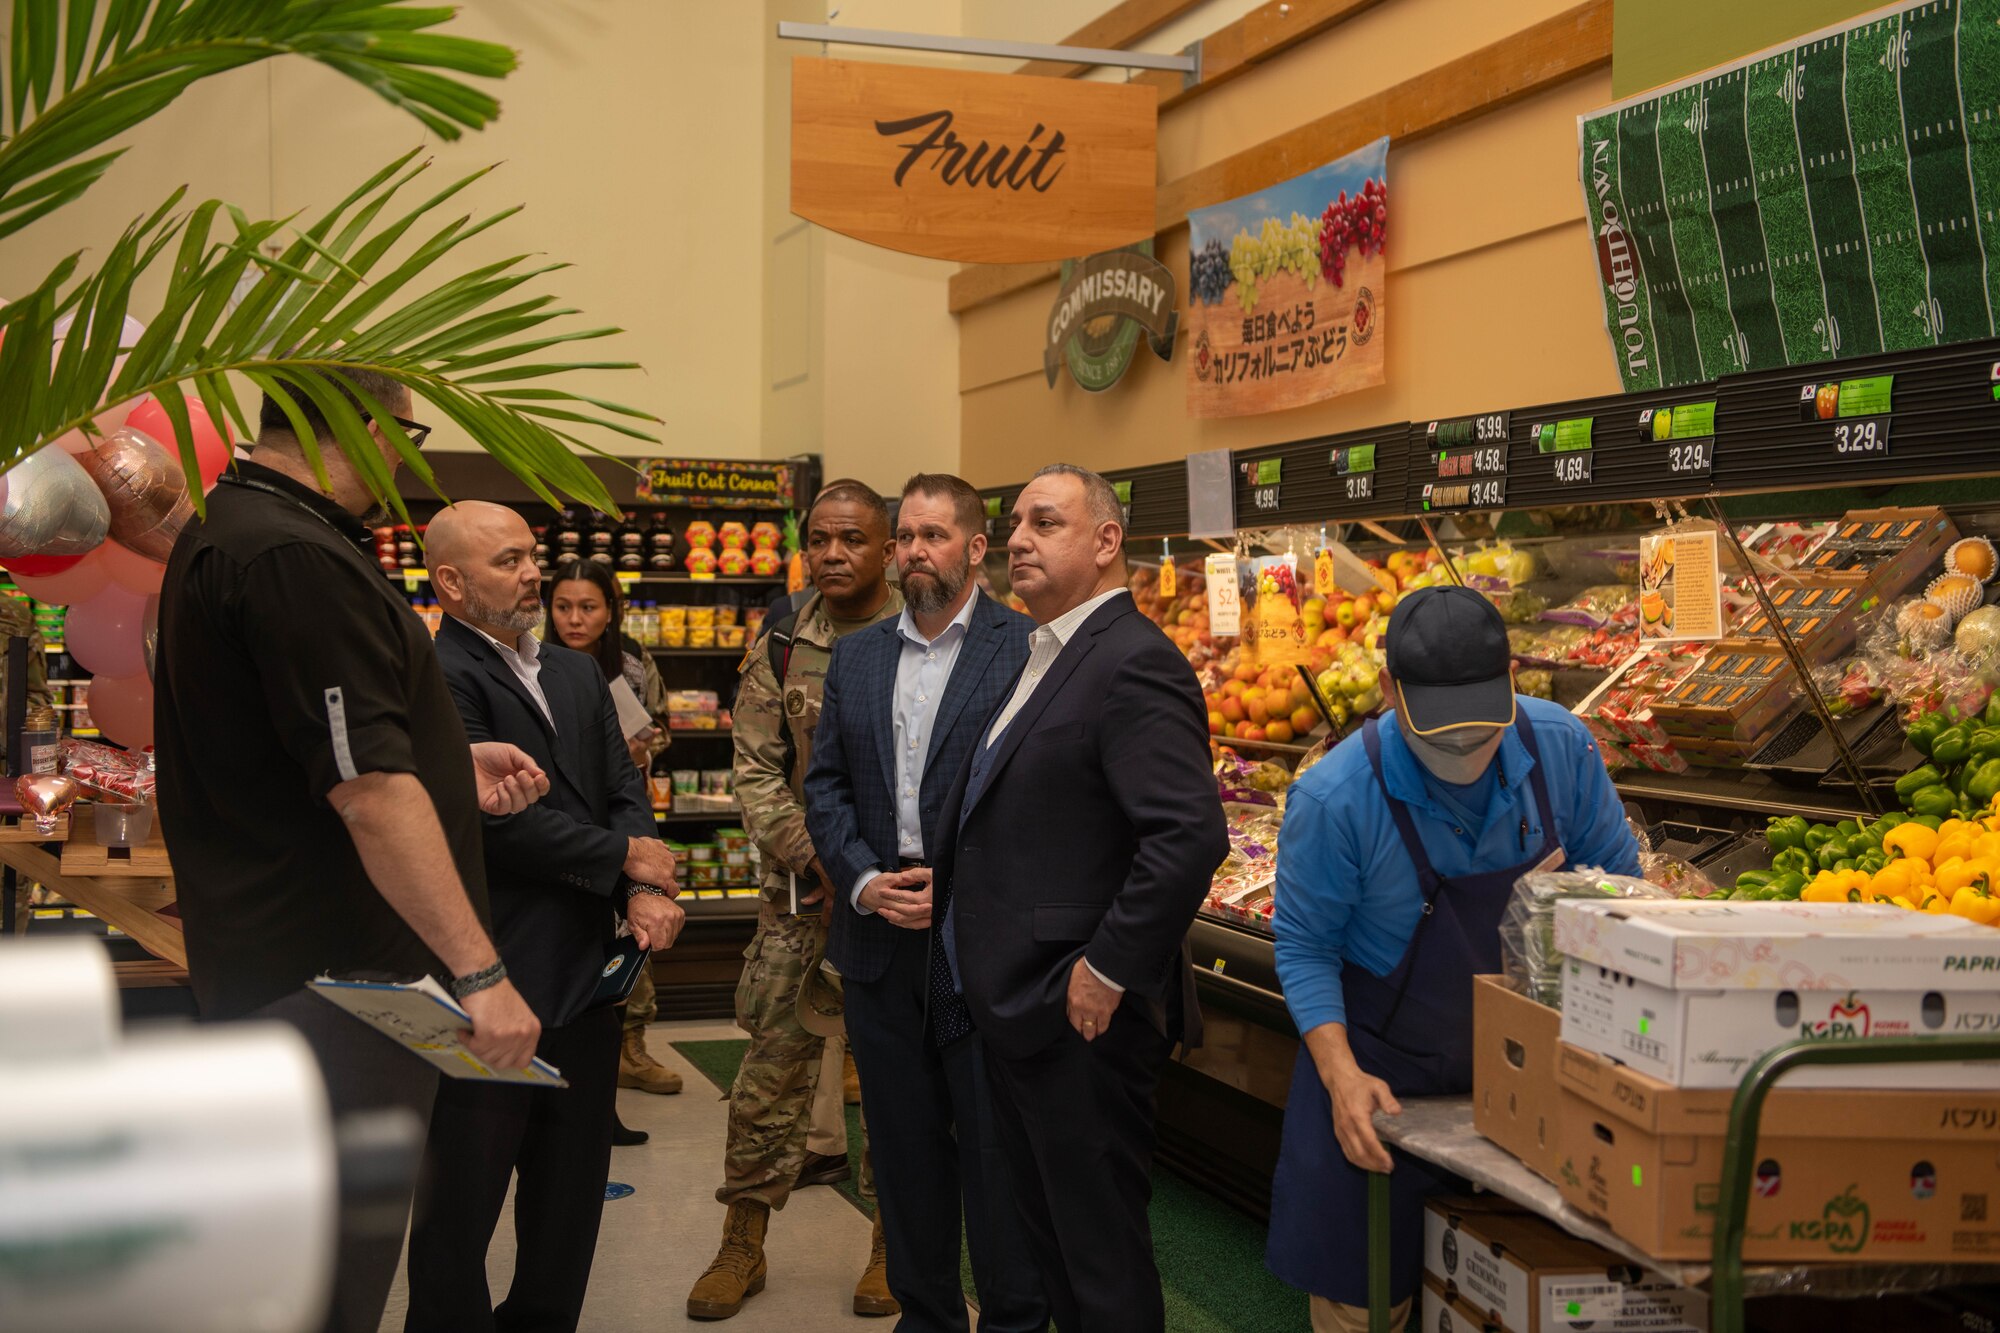 Under Secretary of Defense is briefed by commissary store manager.